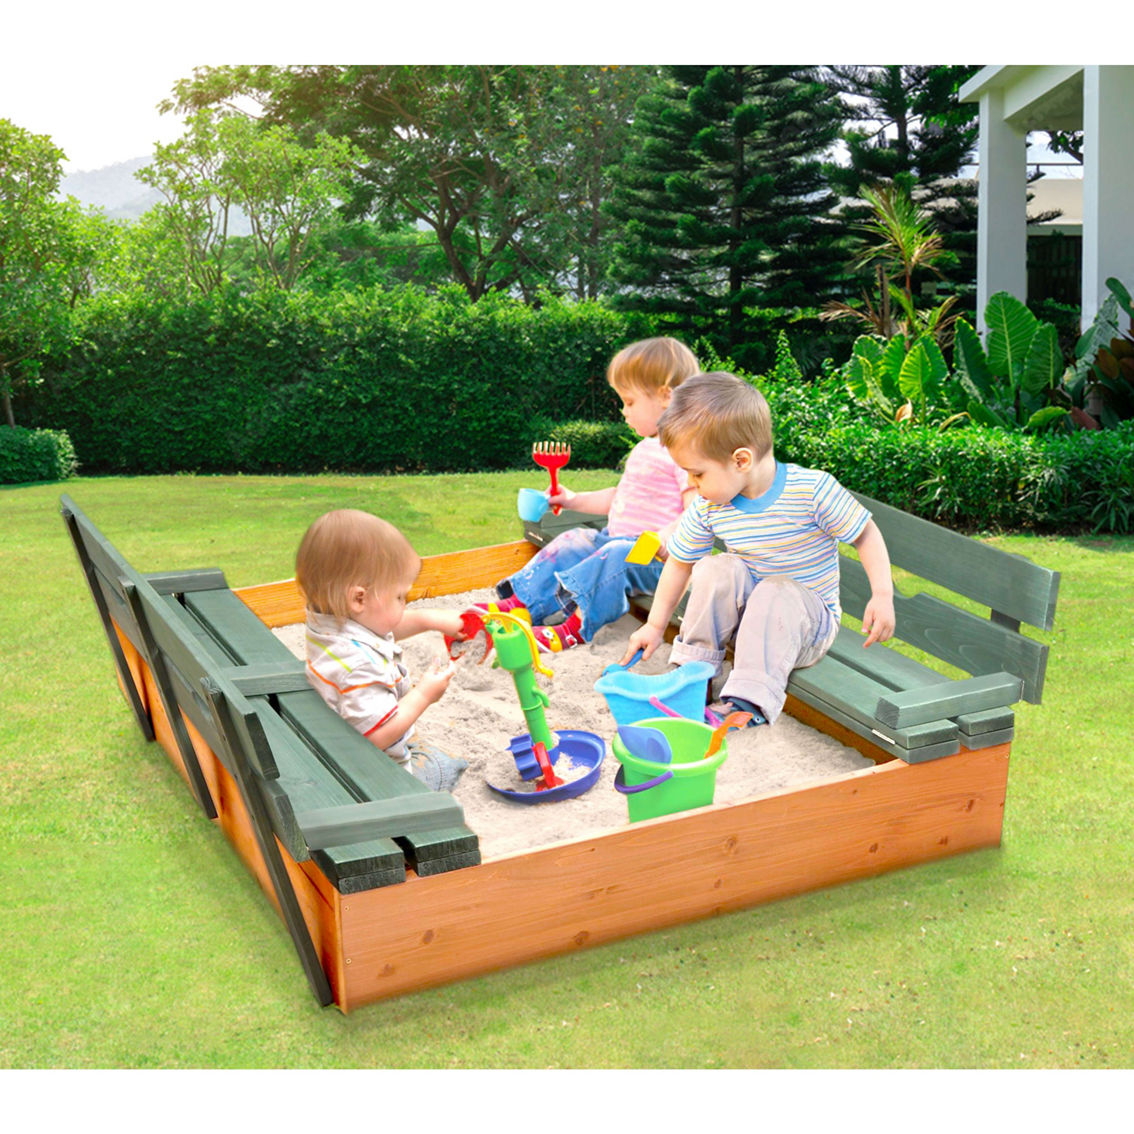 Covered Convertible Cedar Sandbox with Two Bench Seats - Image 2 of 5